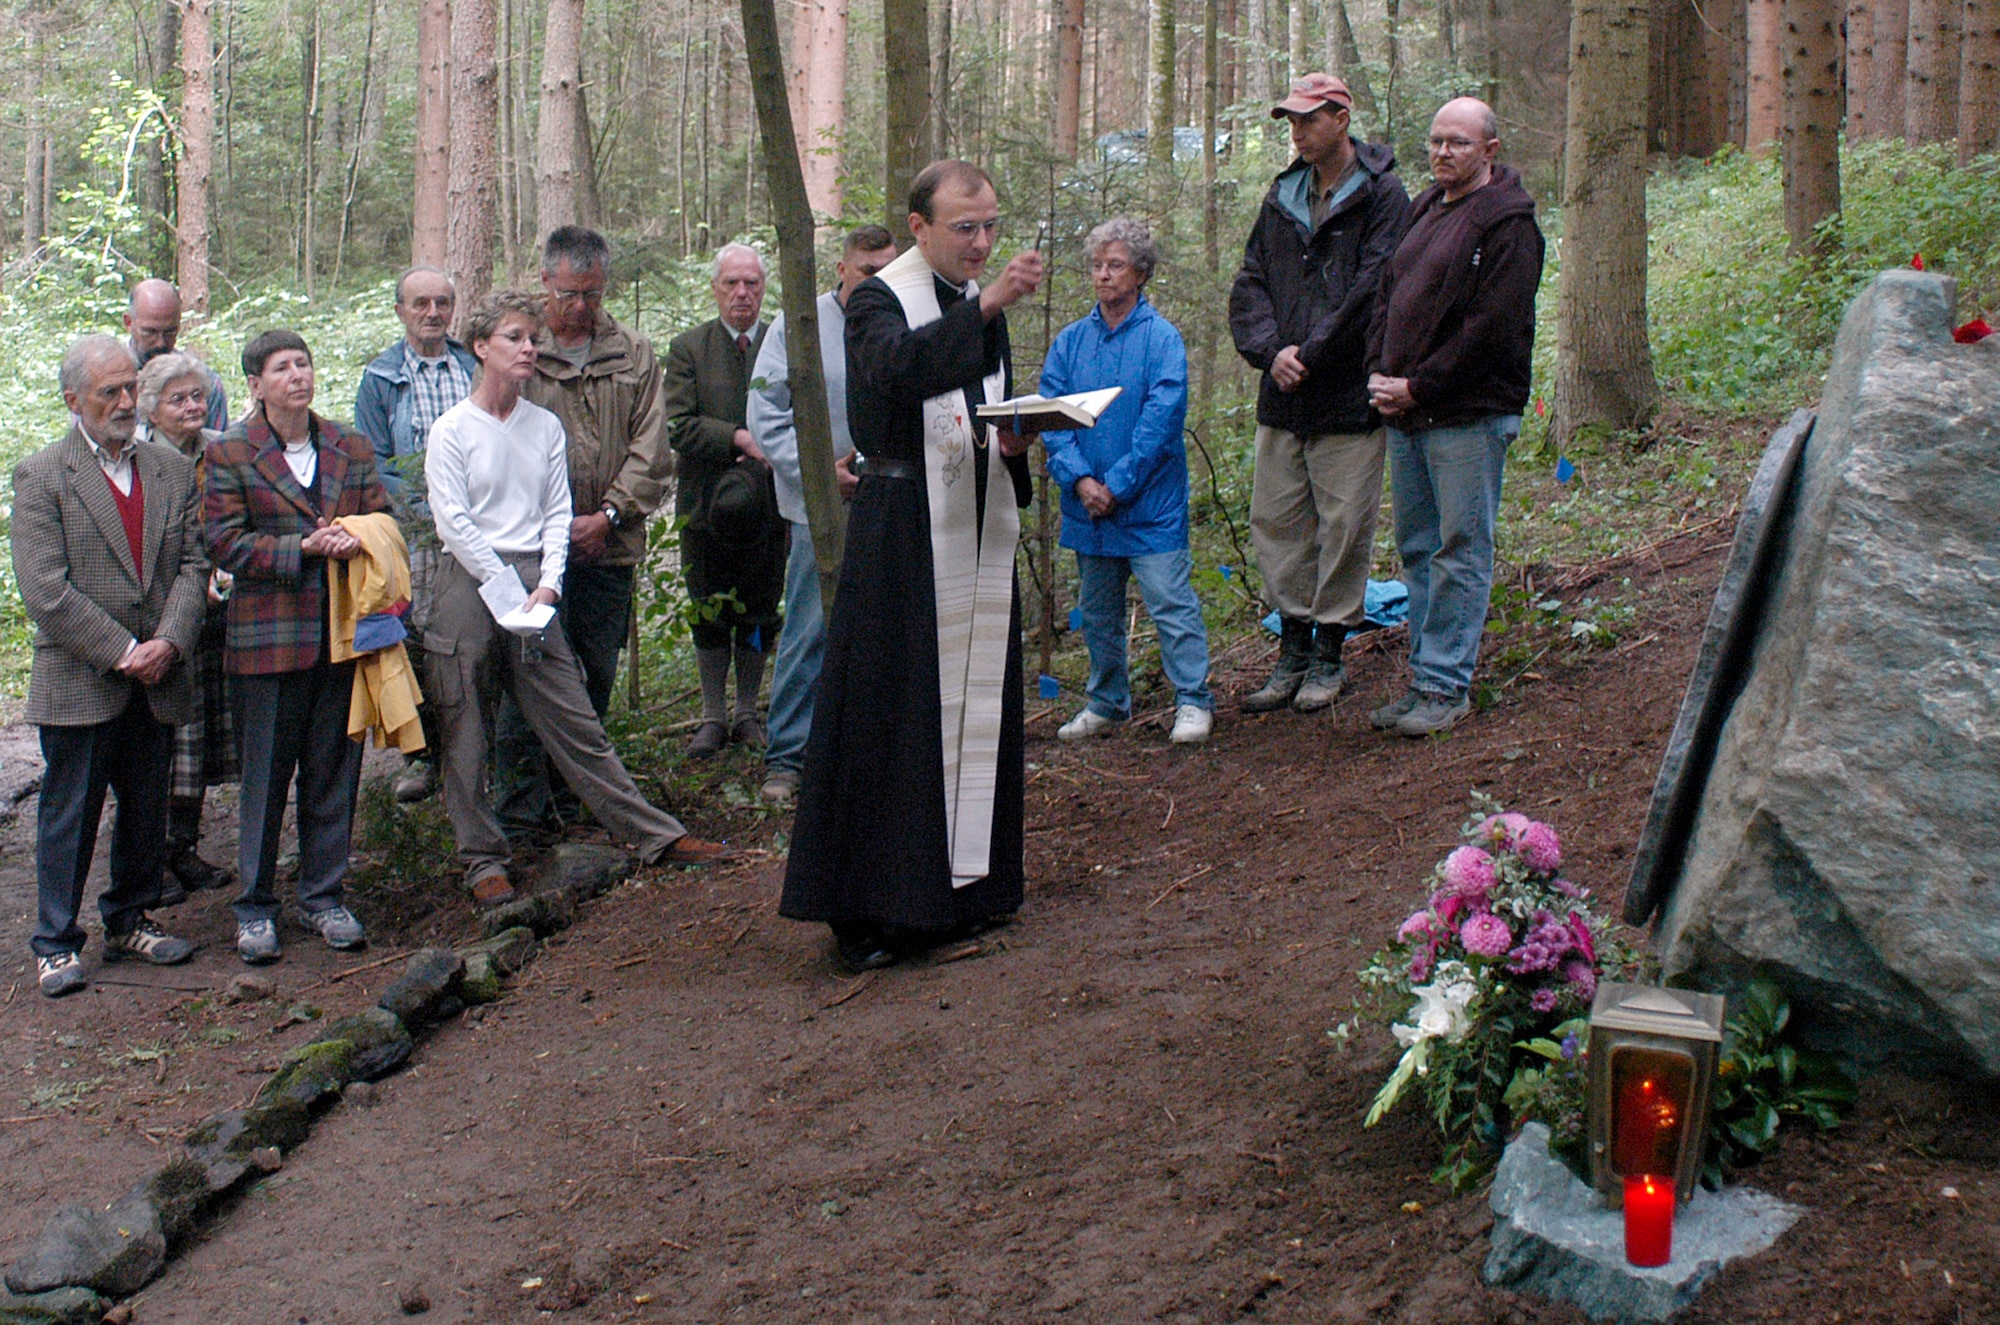 A priest from nearby Vostenhof, Austria, presides over an Aug. 27 memorial service for the members of a B-17 bomber that crashed in the area May 10, 1944. The service was attended by family, friends and members of the Joint POW/MIA Accounting Command. An 18-member JPAC team, including a forensic anthropologist, explosive ordnance disposal technician and field medic, from Hickam Air Force Base, Hawaii, returned Oct. 1 after 45 days in Austria attempting to recover the remains of 1st Lt. Stanley Dwyer and gunner Sgt. John Boros who were lost in the crash. The mission of JPAC is to achieve the fullest possible accounting of all Americans missing as a result of the nation's past conflicts. (U.S. Air Force photo/Staff Sgt. Derrick C. Goode)